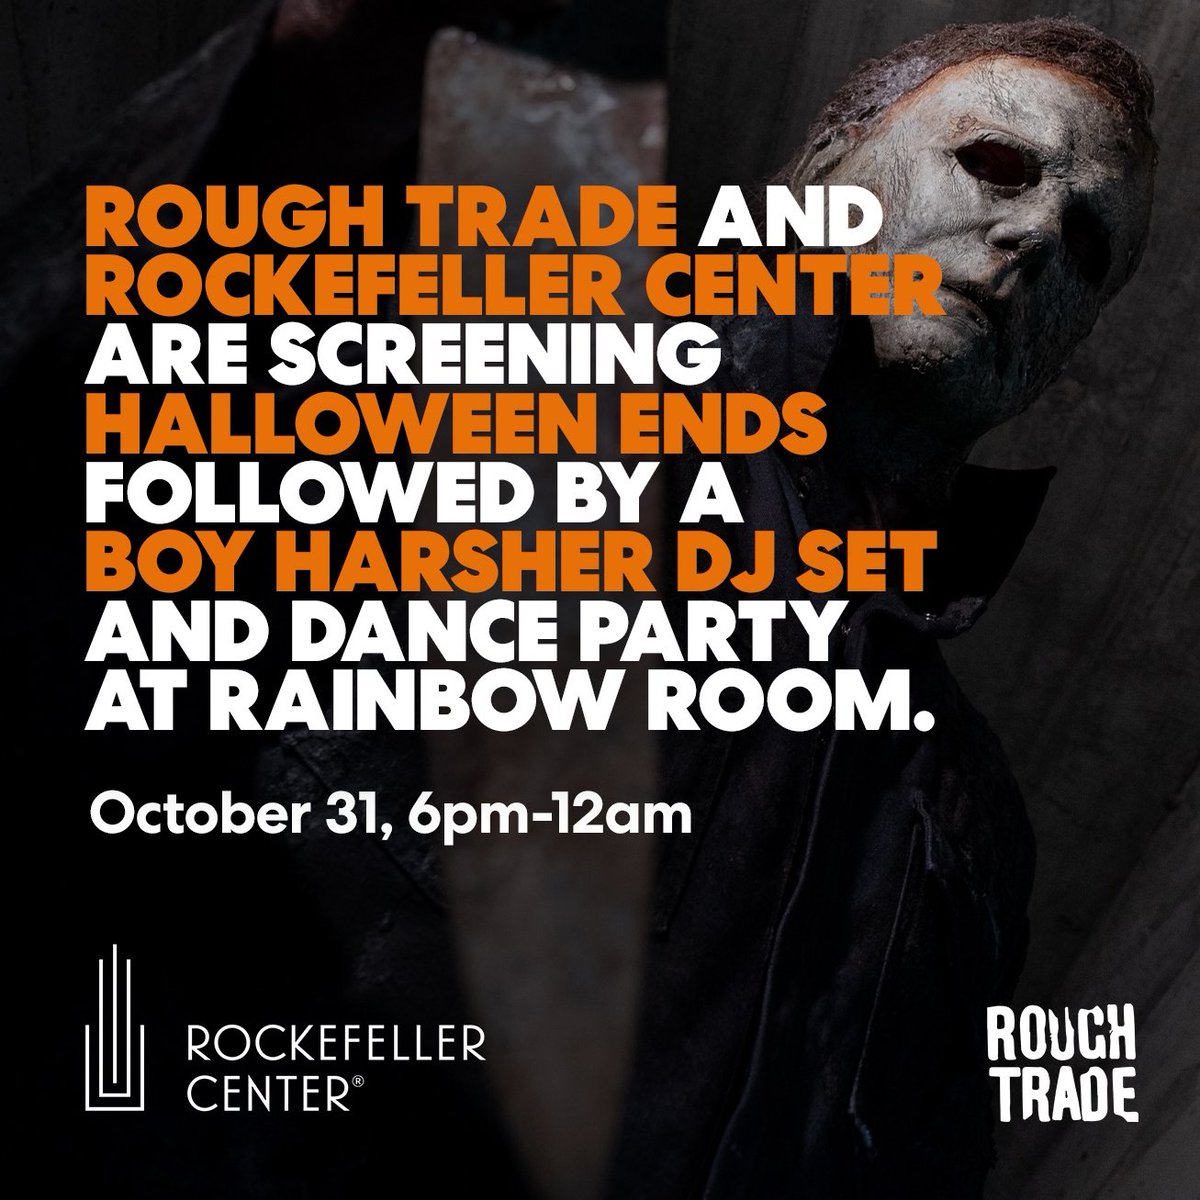 Join us to celebrate @SacredBones anniversary along with the soundtrack for #HalloweenEnds with a special event at the Rainbow Room, presented by Rough Trade and Rockefeller Center. The event will feature a screening of Halloween Ends followed by a DJ set from @BoyHarsher.